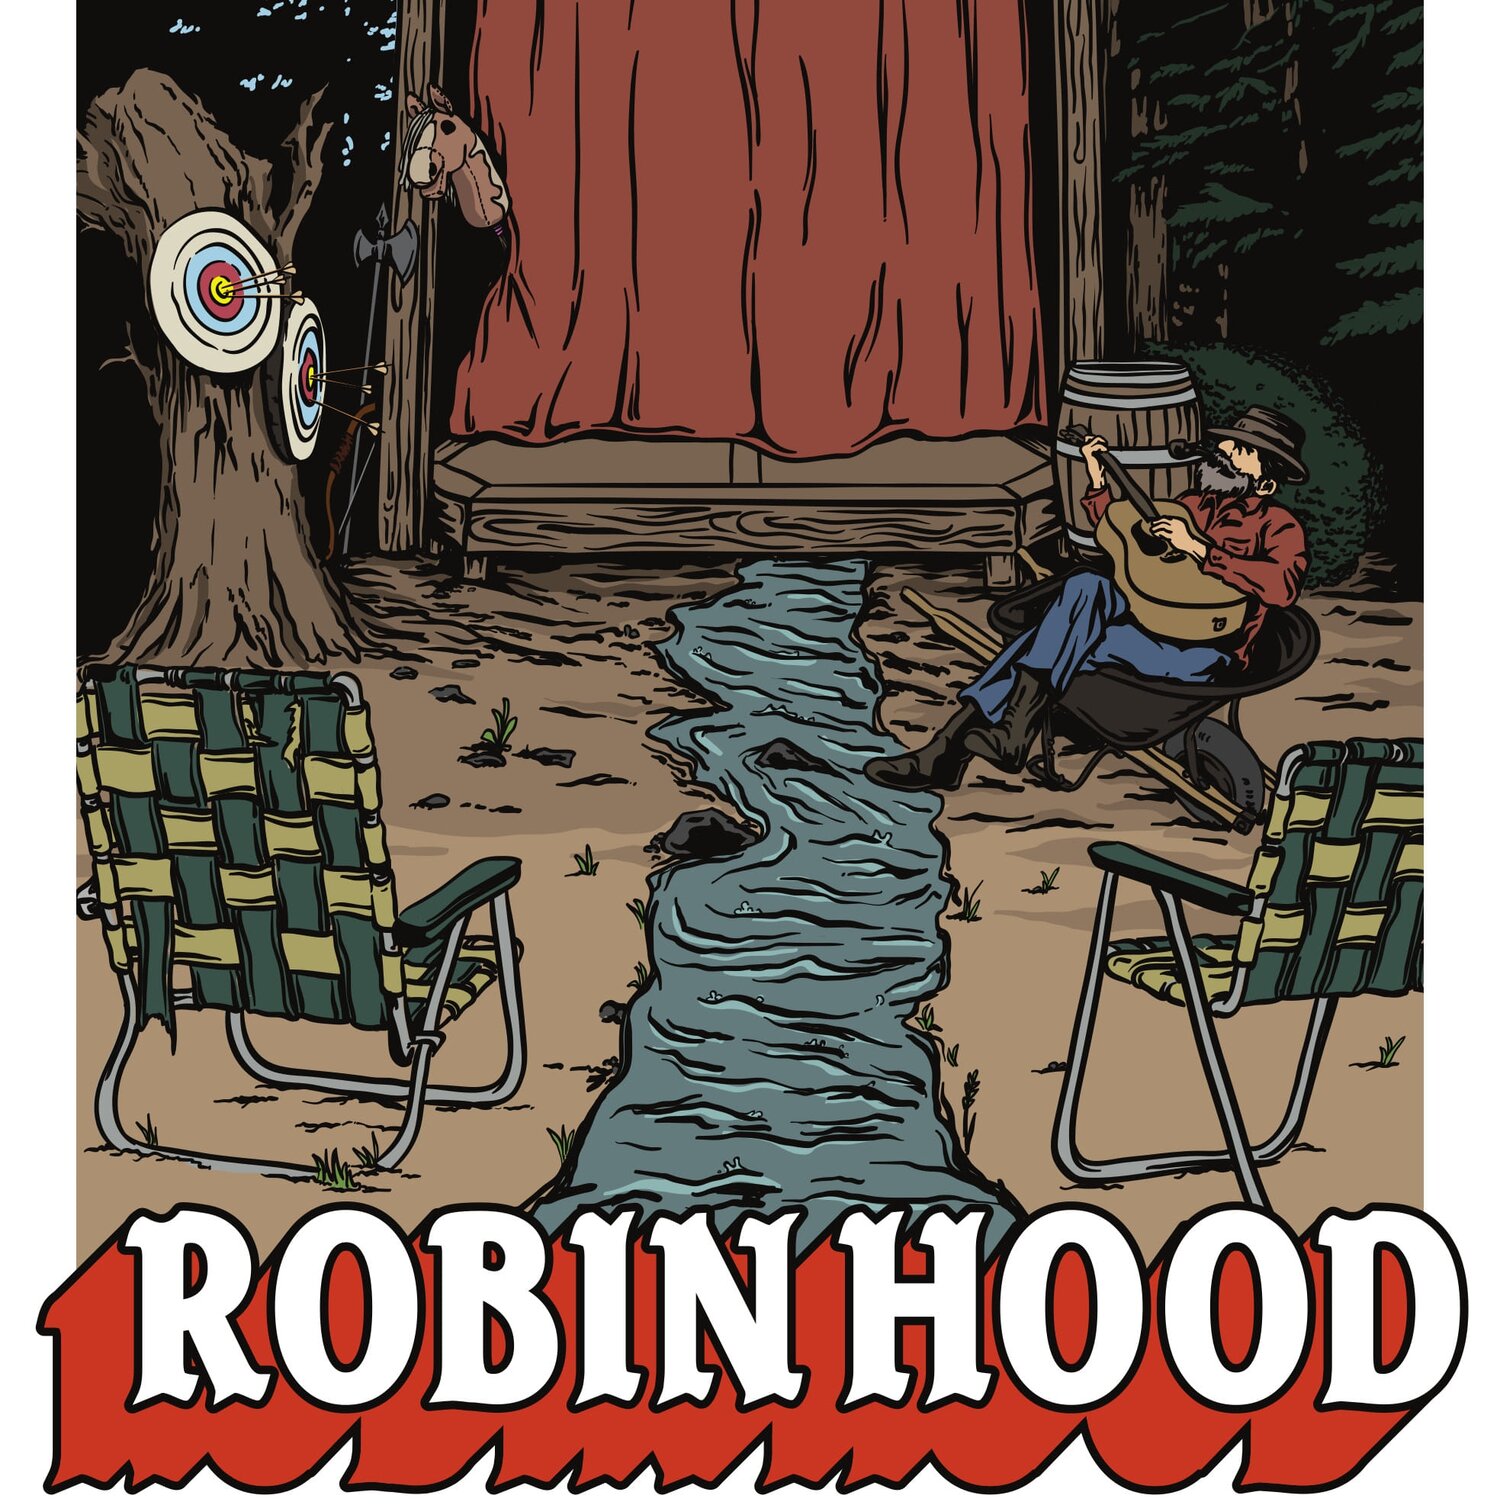 Poster for Robin Hood. Alt text: The cartoon poster features a stage in the woods framed with brown wood and decorated with yellow, red and blue bunting. Two lawn chairs face the stage, separated by a small stream that flows down the middle of the poster. A bearded character with a guitar sits in front of the stage to the right, while to the left, two targets hang, both with multiple arrows stuck in the bullseye. ‘ROBIN HOOD’ is written in white at the bottom with red shadowing.